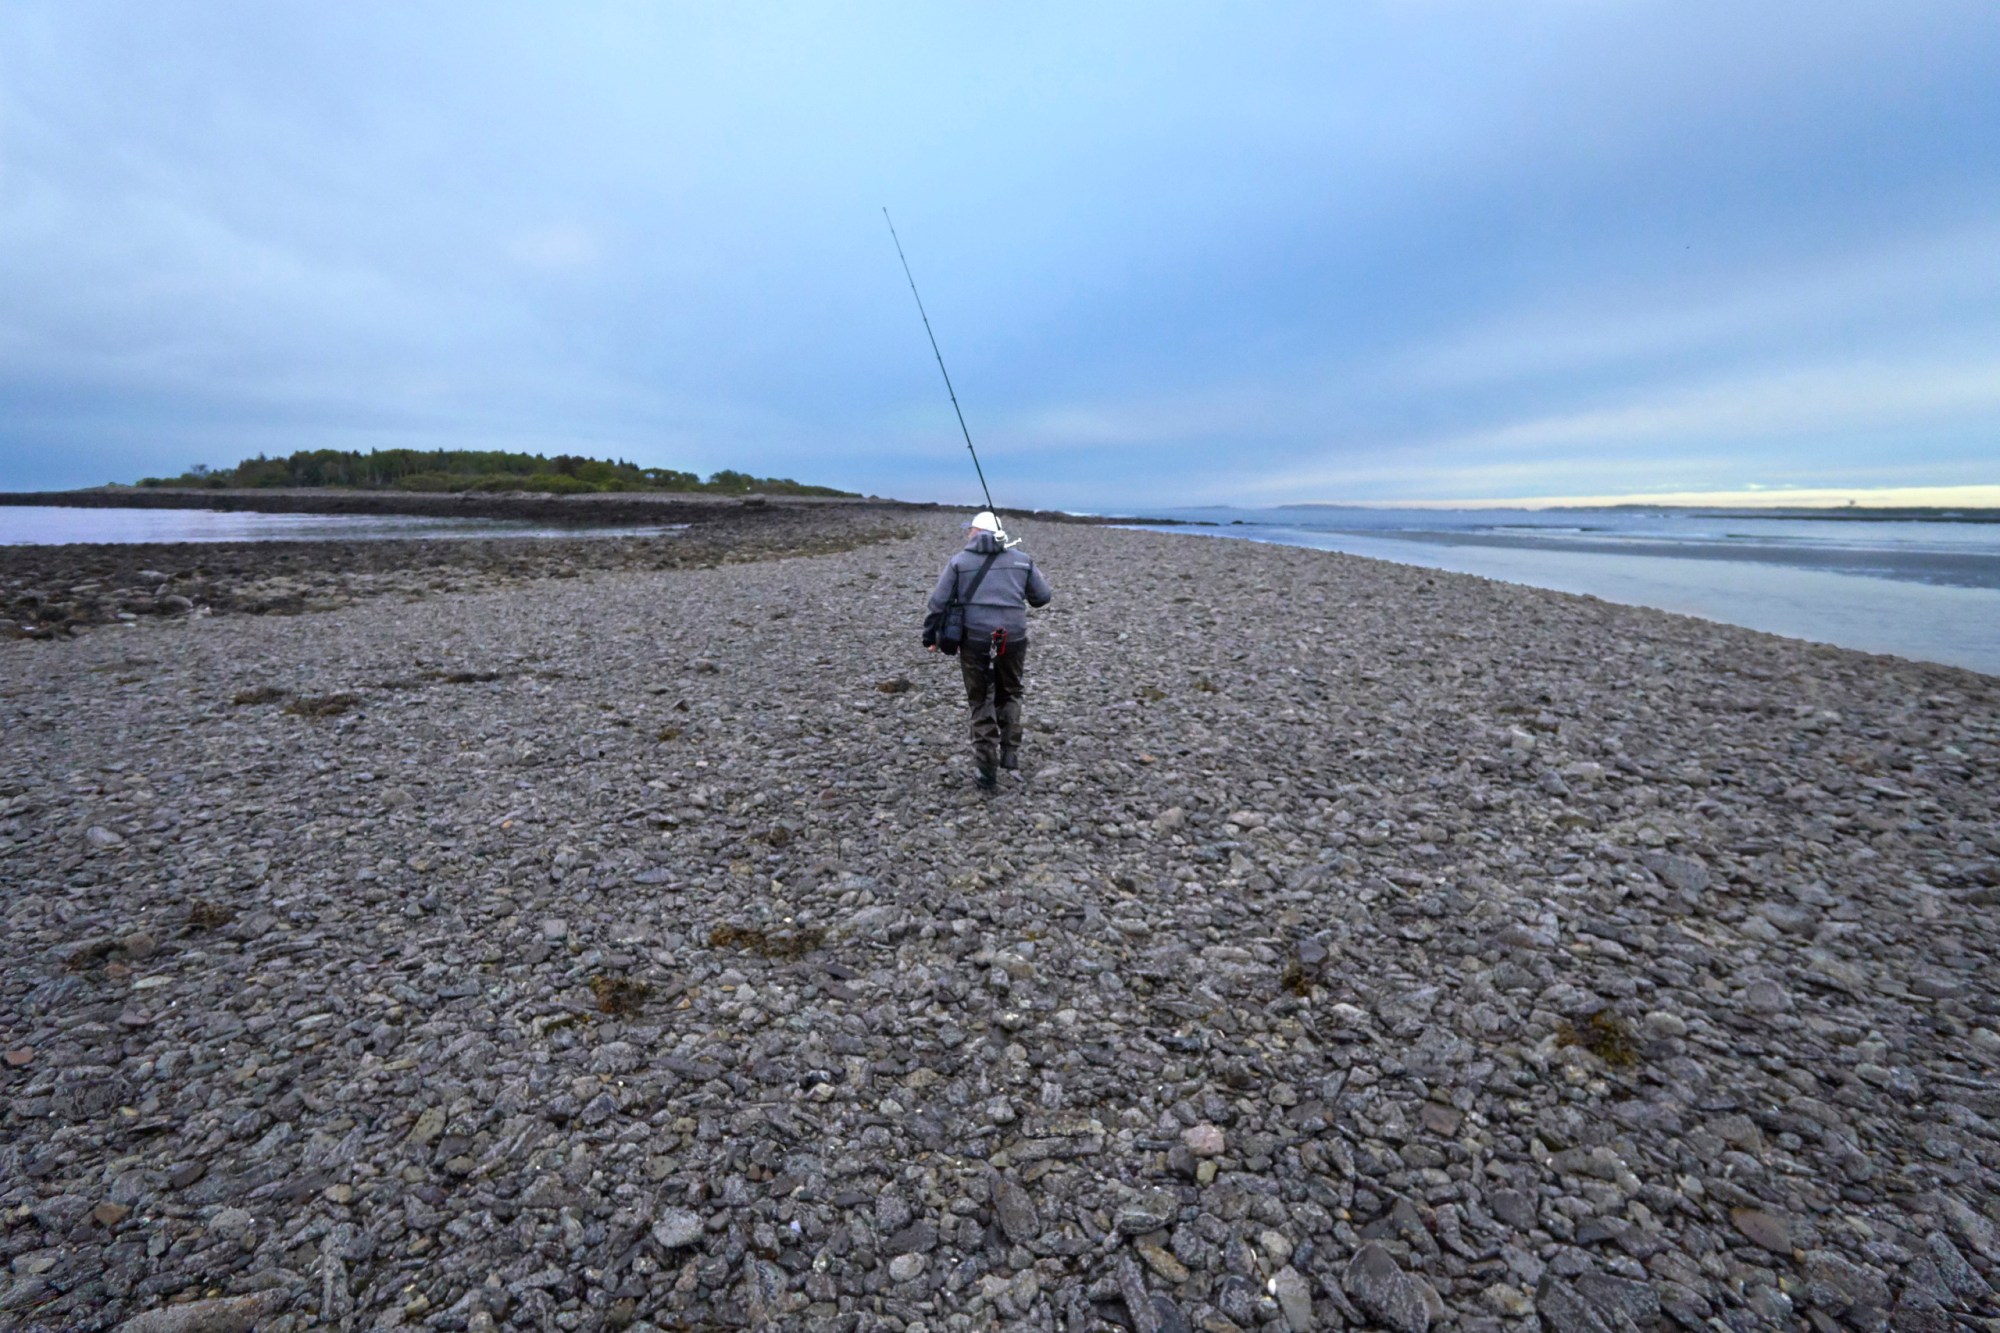 KENNEBUNKPORT, ME - JUNE 9: Paul Korenkiewicz walks across a rock bar while fishing for stripers off the coast of Kennebunkport on Friday, June 9, 2017. (Staff Photo by Gregory Rec/Portland Press Herald via Getty Images)